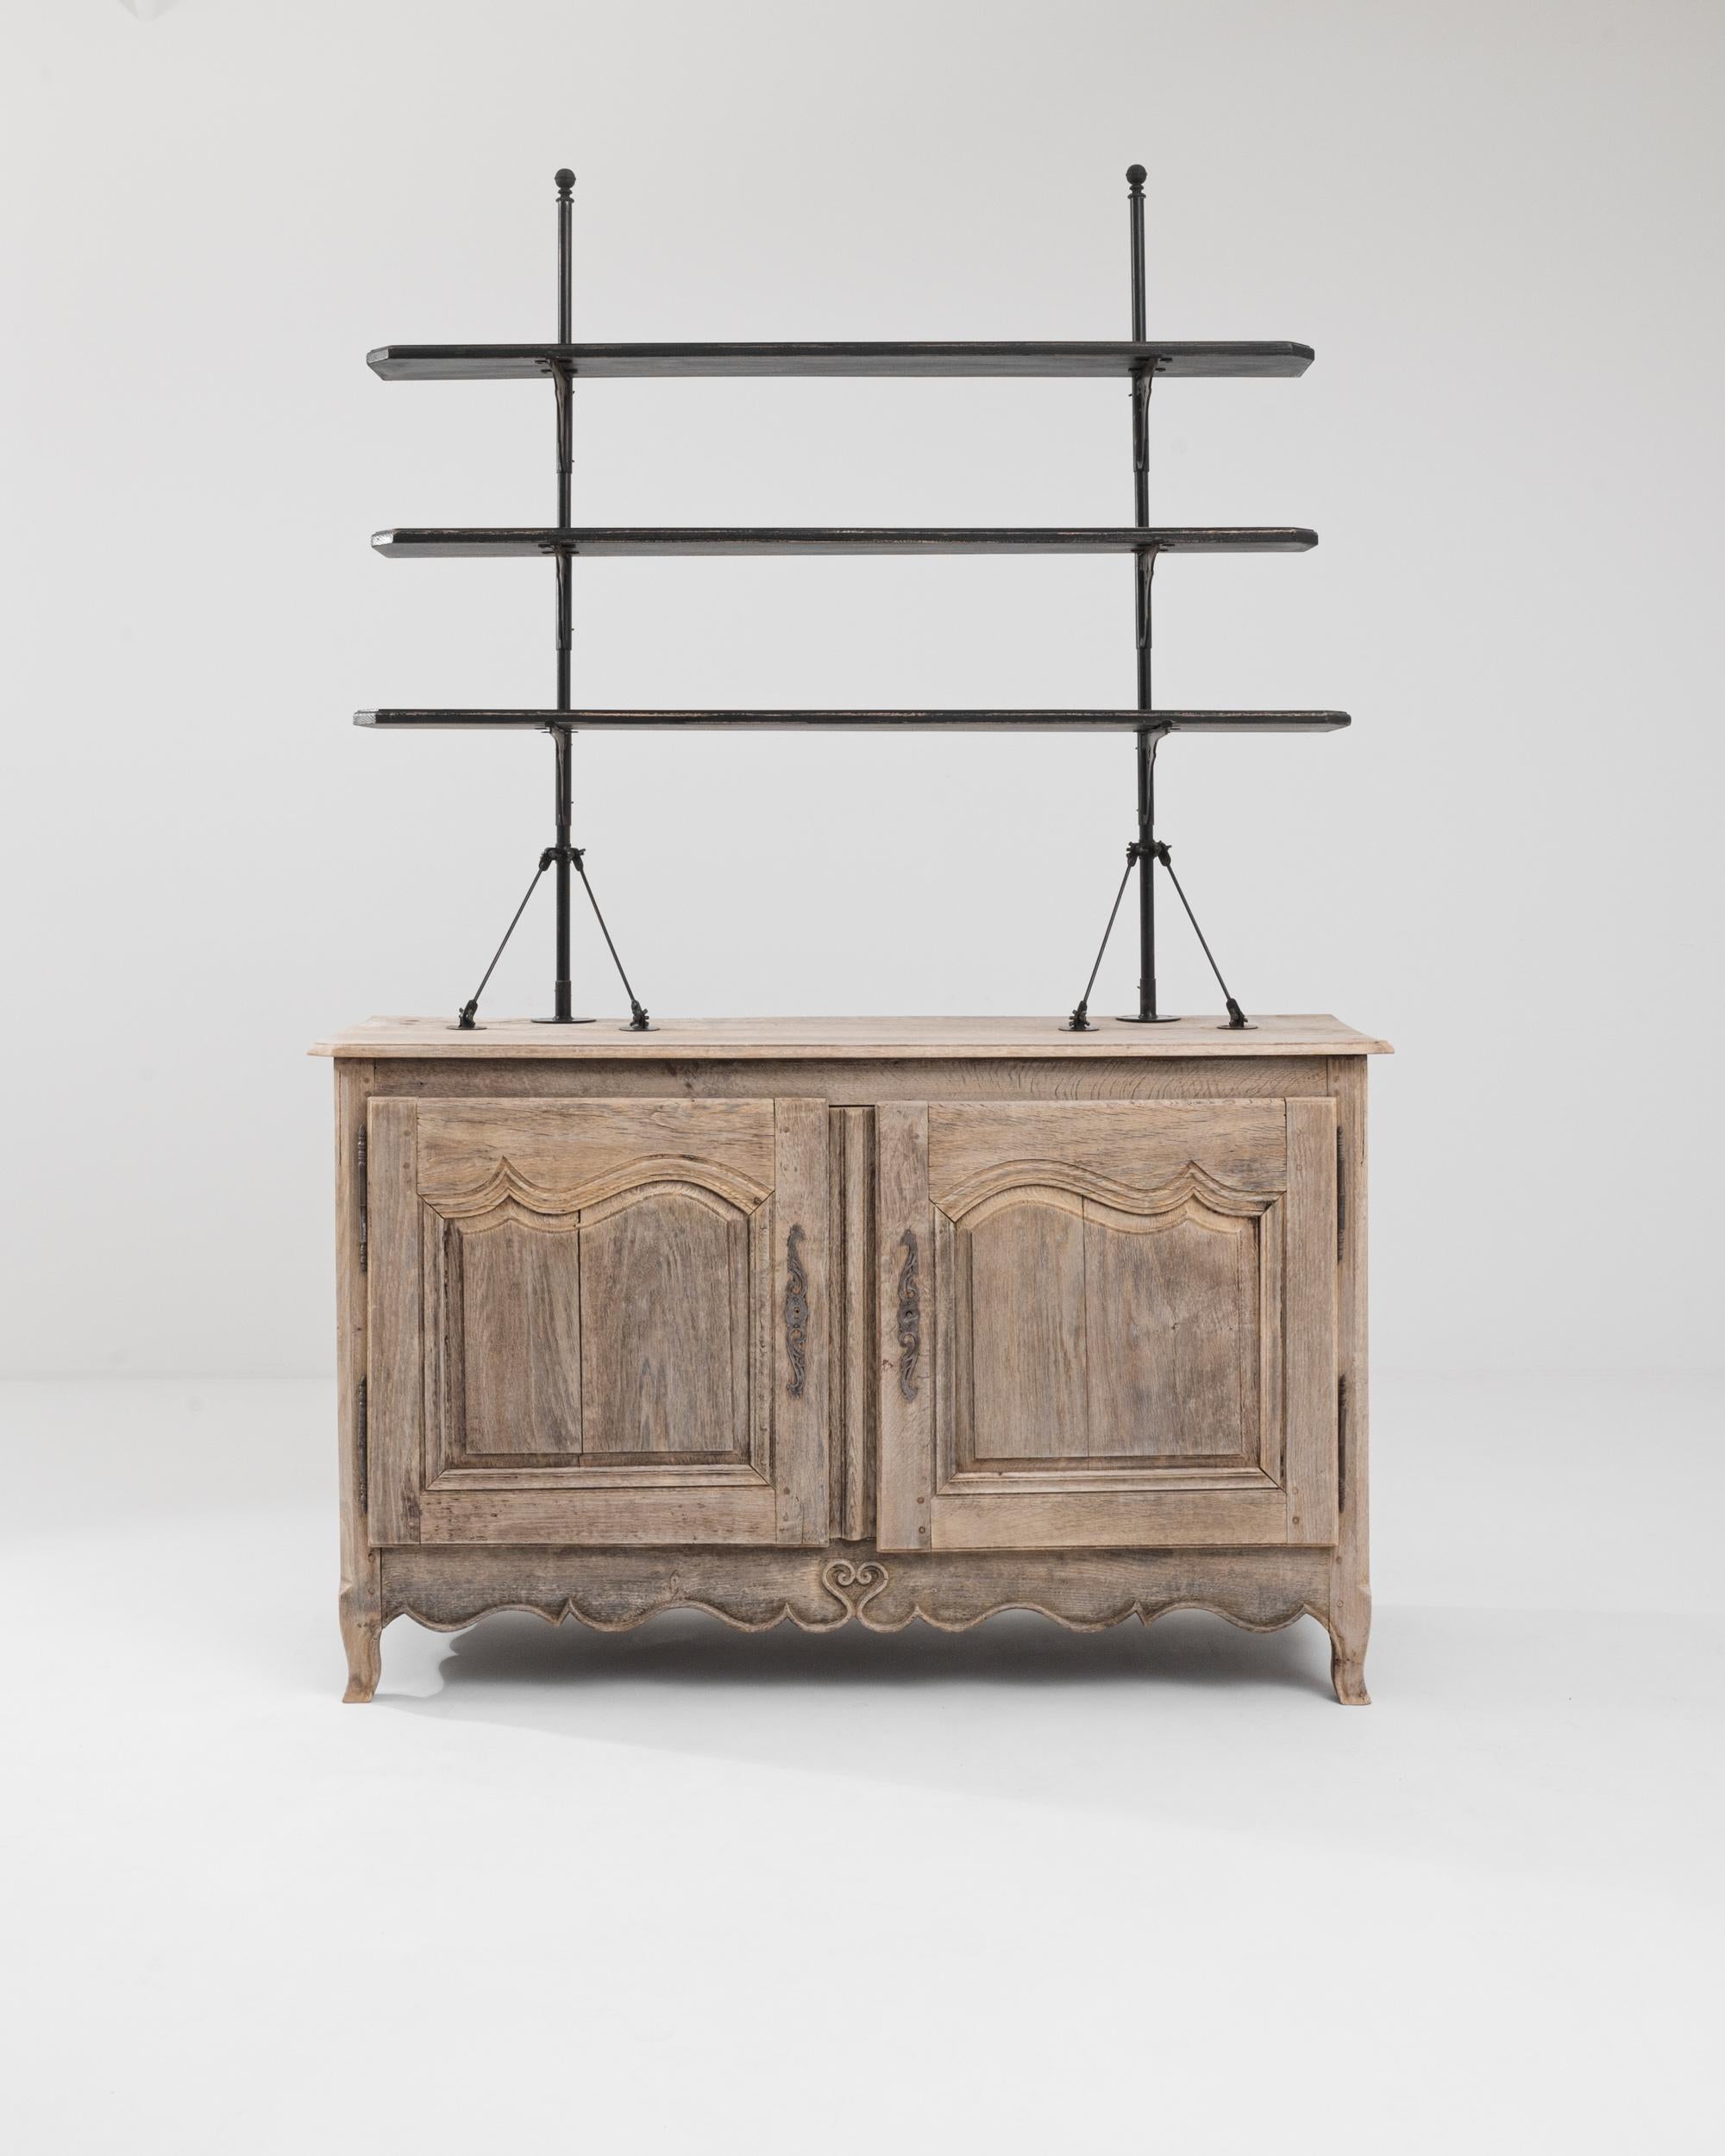 Graceful and unique, this antique oak display cabinet cuts a striking silhouette. Made in France in the 1800s, the light, airy design of the upper shelves evokes the masts of sailing ships; the paneling of the lower cabinet rises in crests like